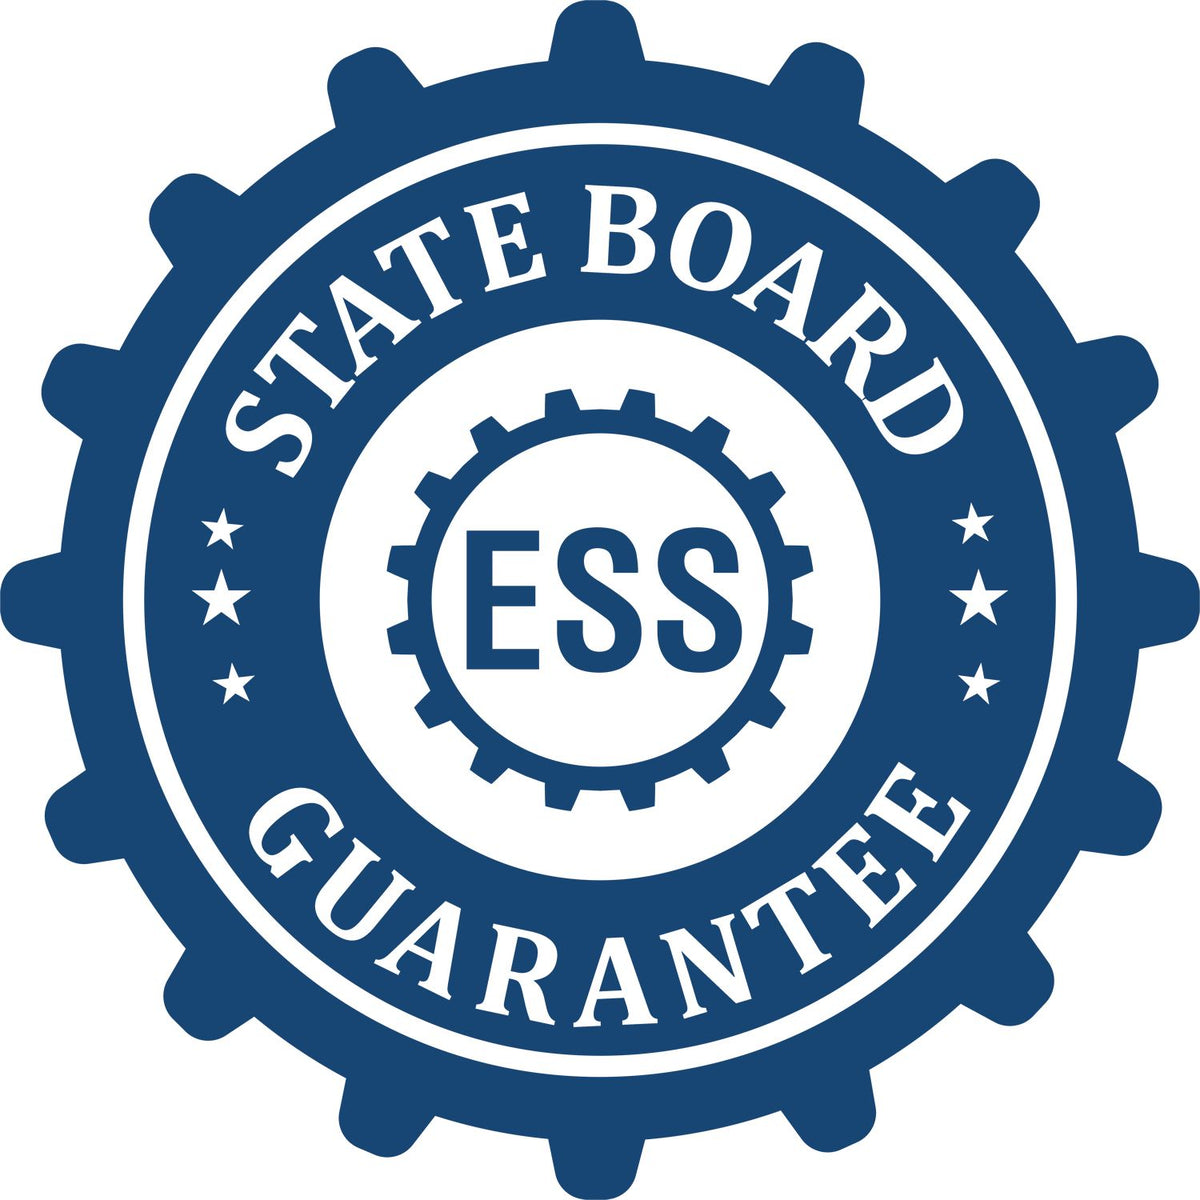 An emblem in a gear shape illustrating a state board guarantee for the State of Nebraska Extended Long Reach Engineer Seal product.